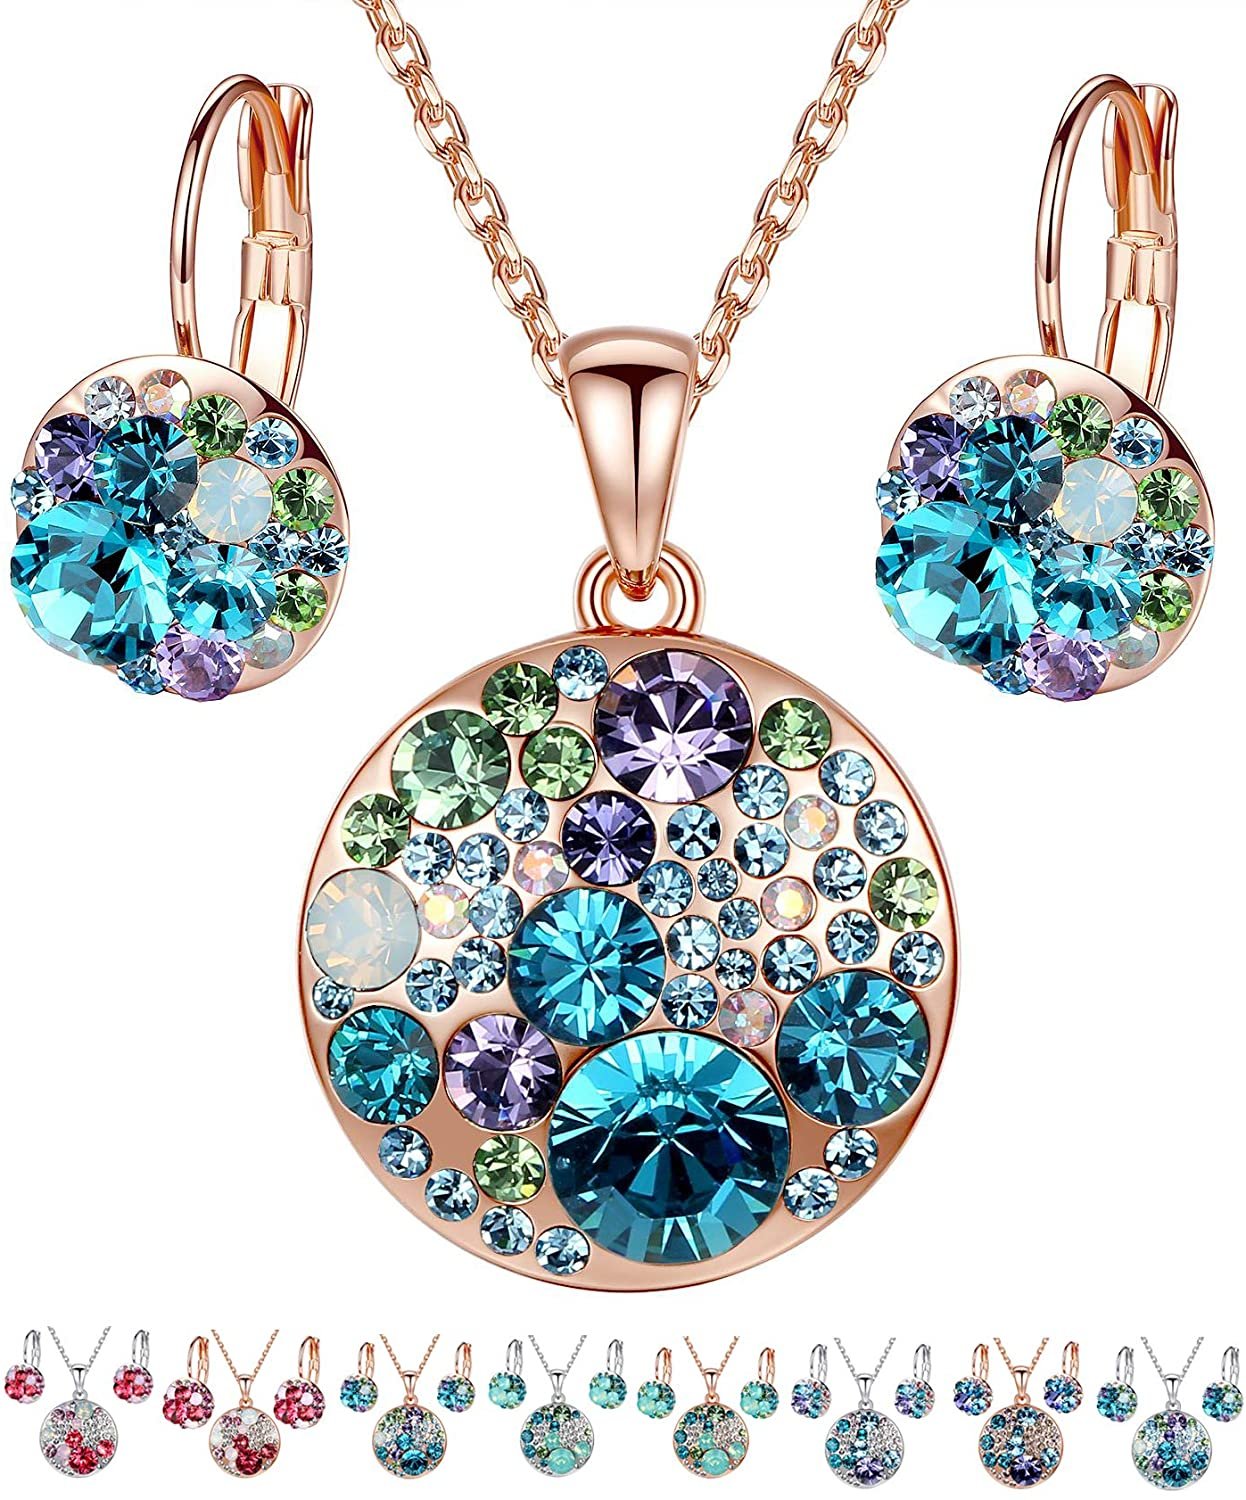 Swarovski womens Sparkling Dance Round Pendant Necklace and Stud Pierced Earrings  Set with Blue Crystals on a Rhodium Plated Setting - Walmart.com